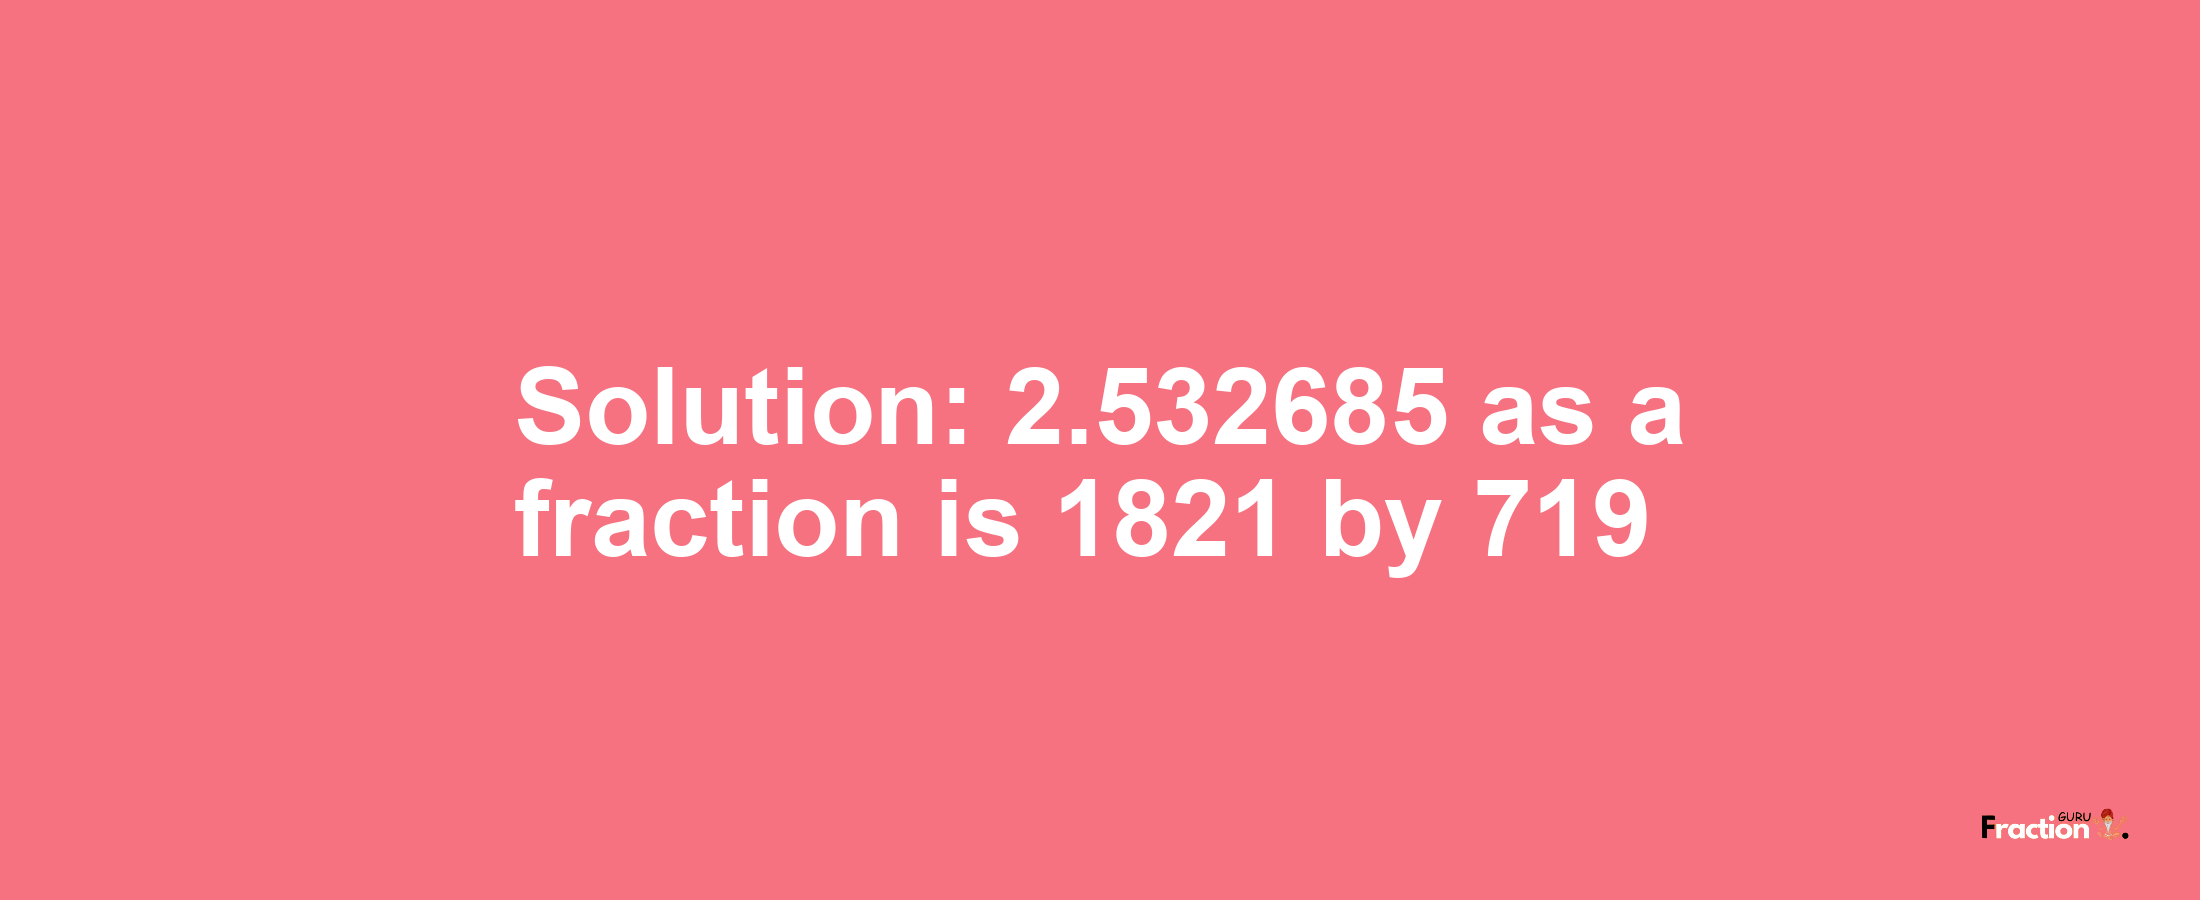 Solution:2.532685 as a fraction is 1821/719